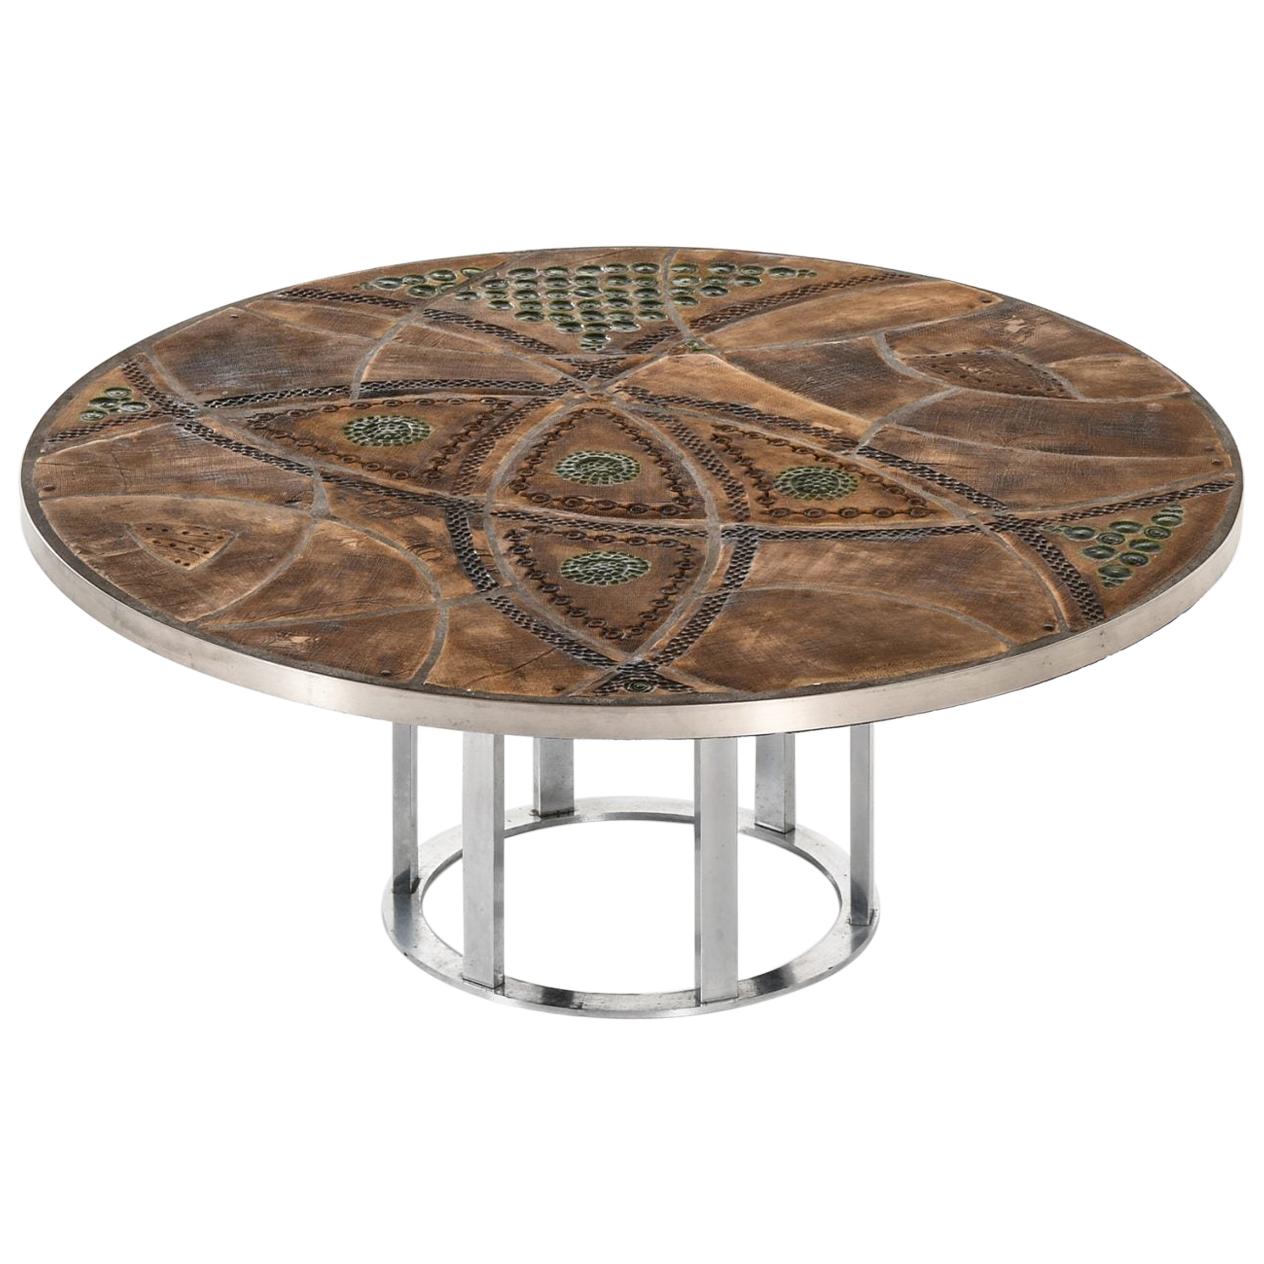 Lilly Just Lichtenberg Coffee Table Produced in Denmark